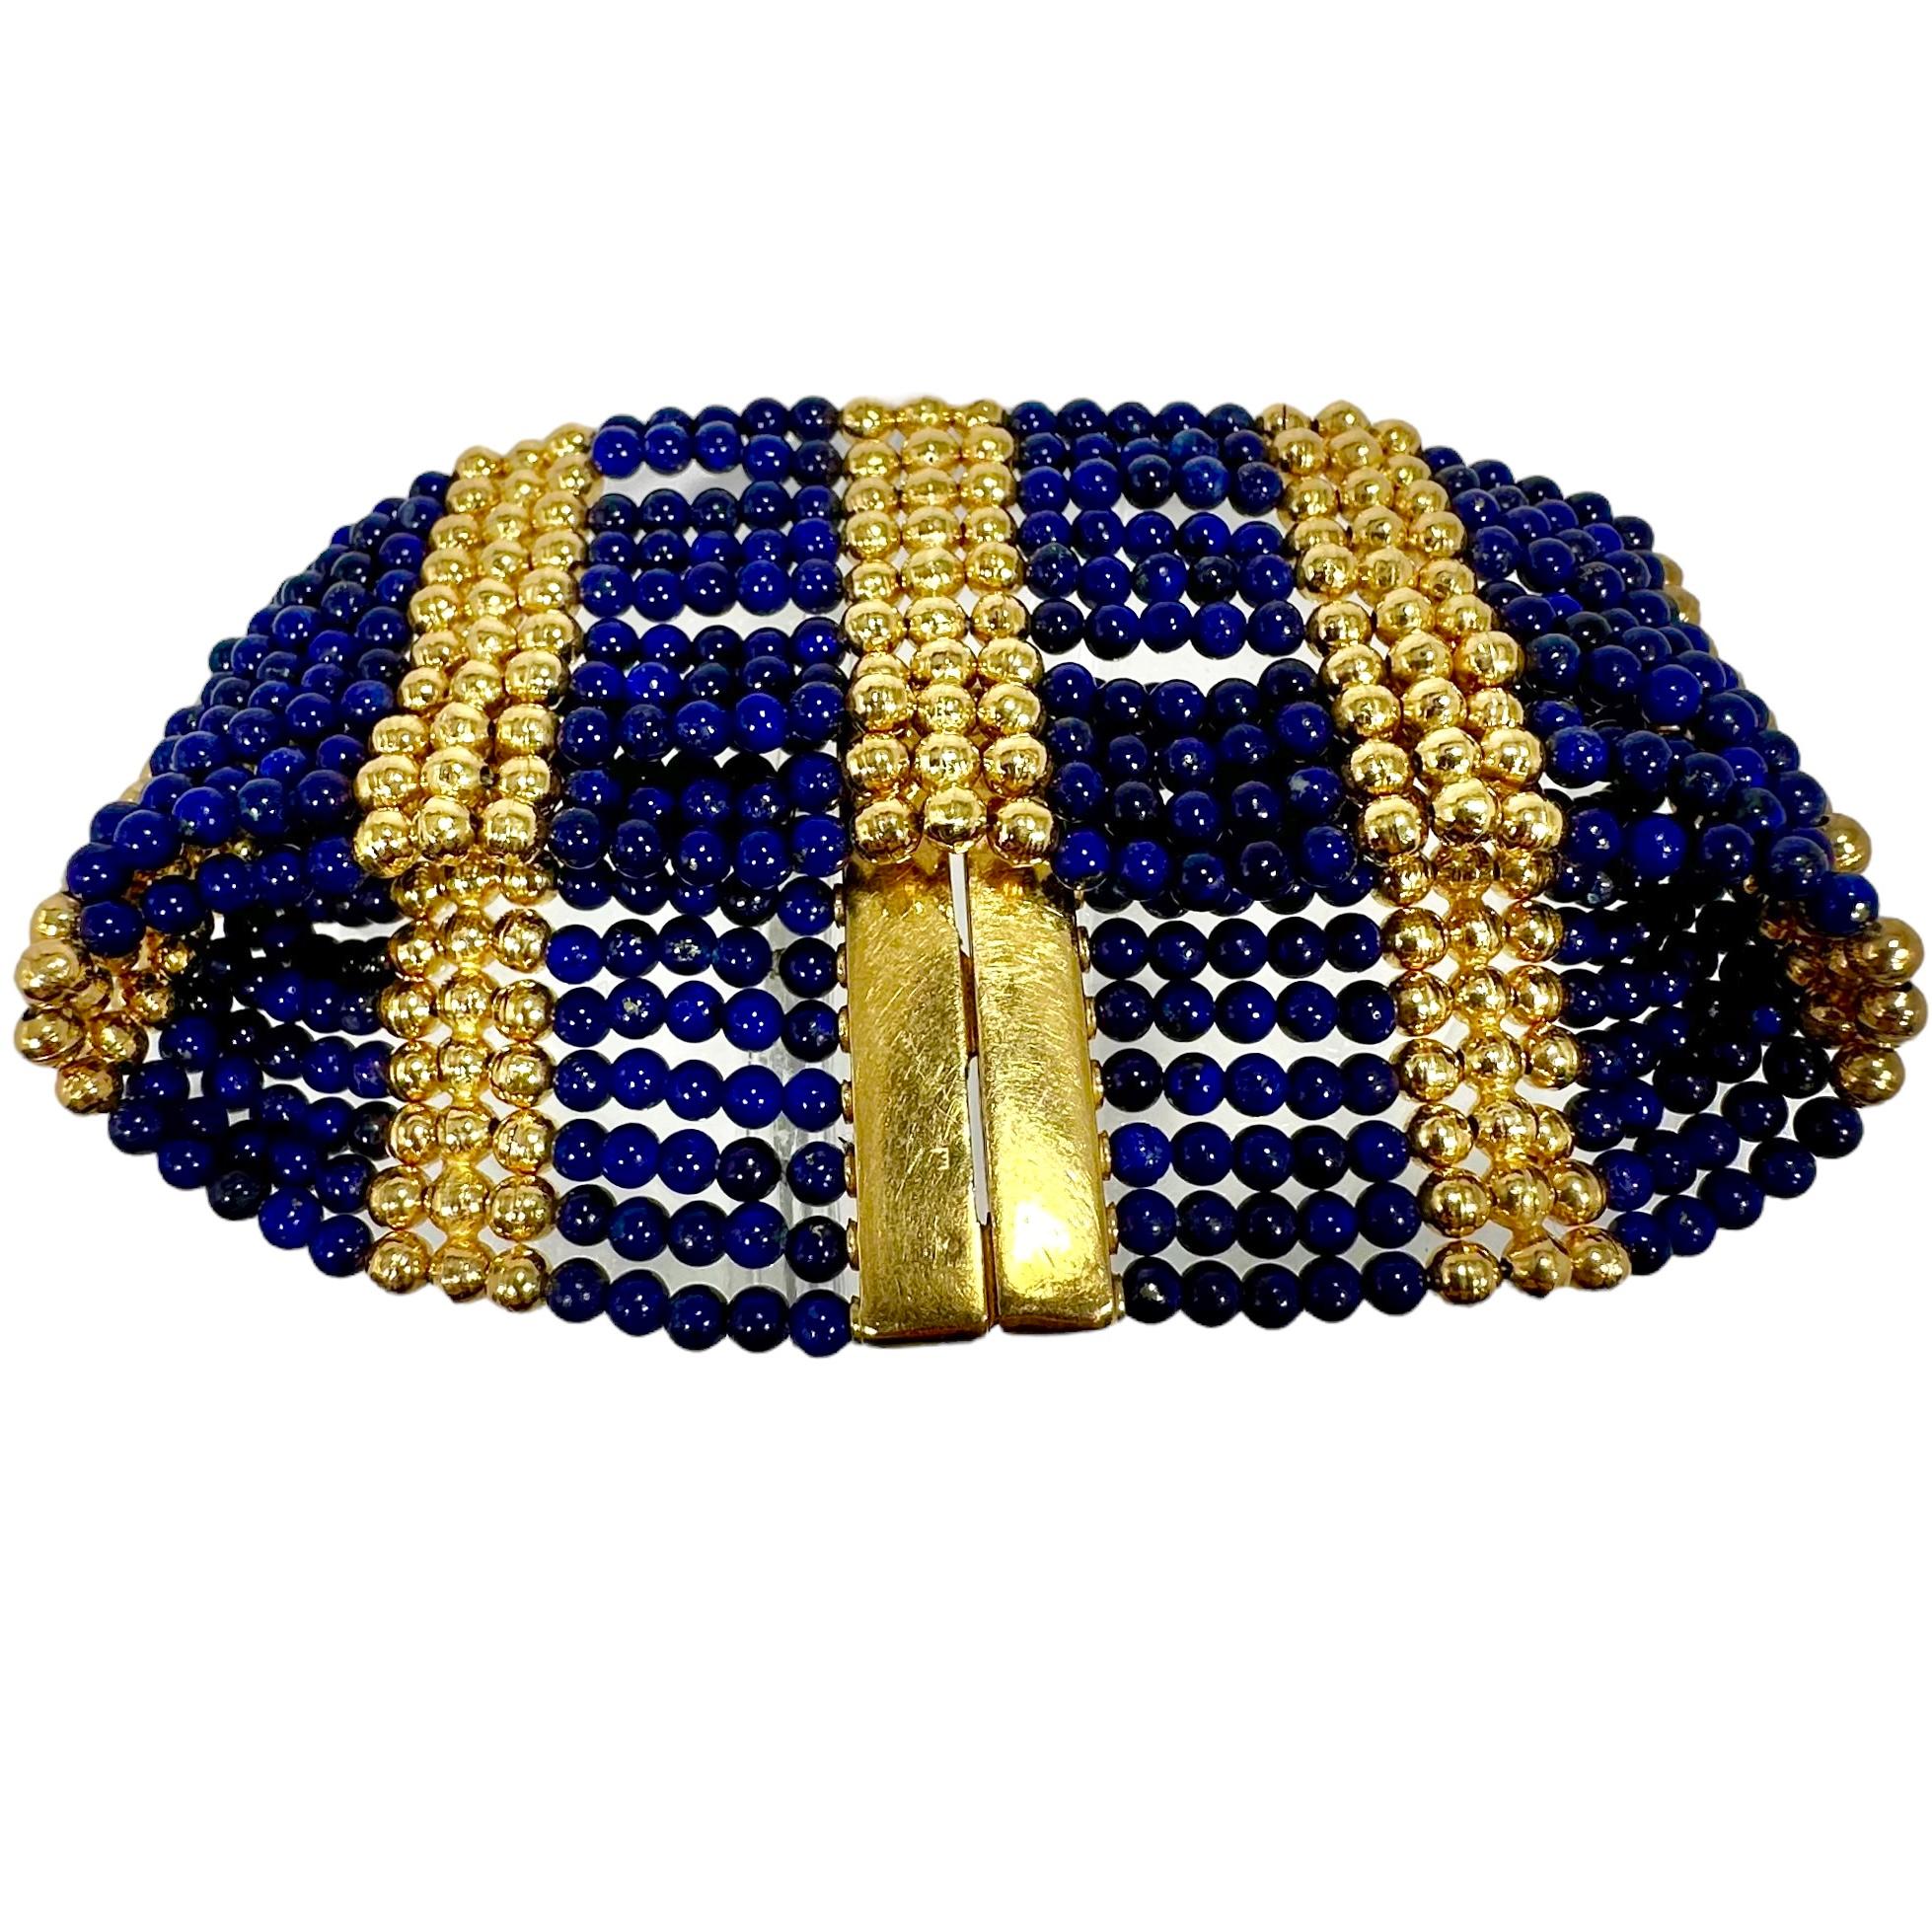 Casually Elegant 1.25 Inches Wide Vintage 18k Gold & Lapis-Lazuli Bead Bracelet In Good Condition For Sale In Palm Beach, FL